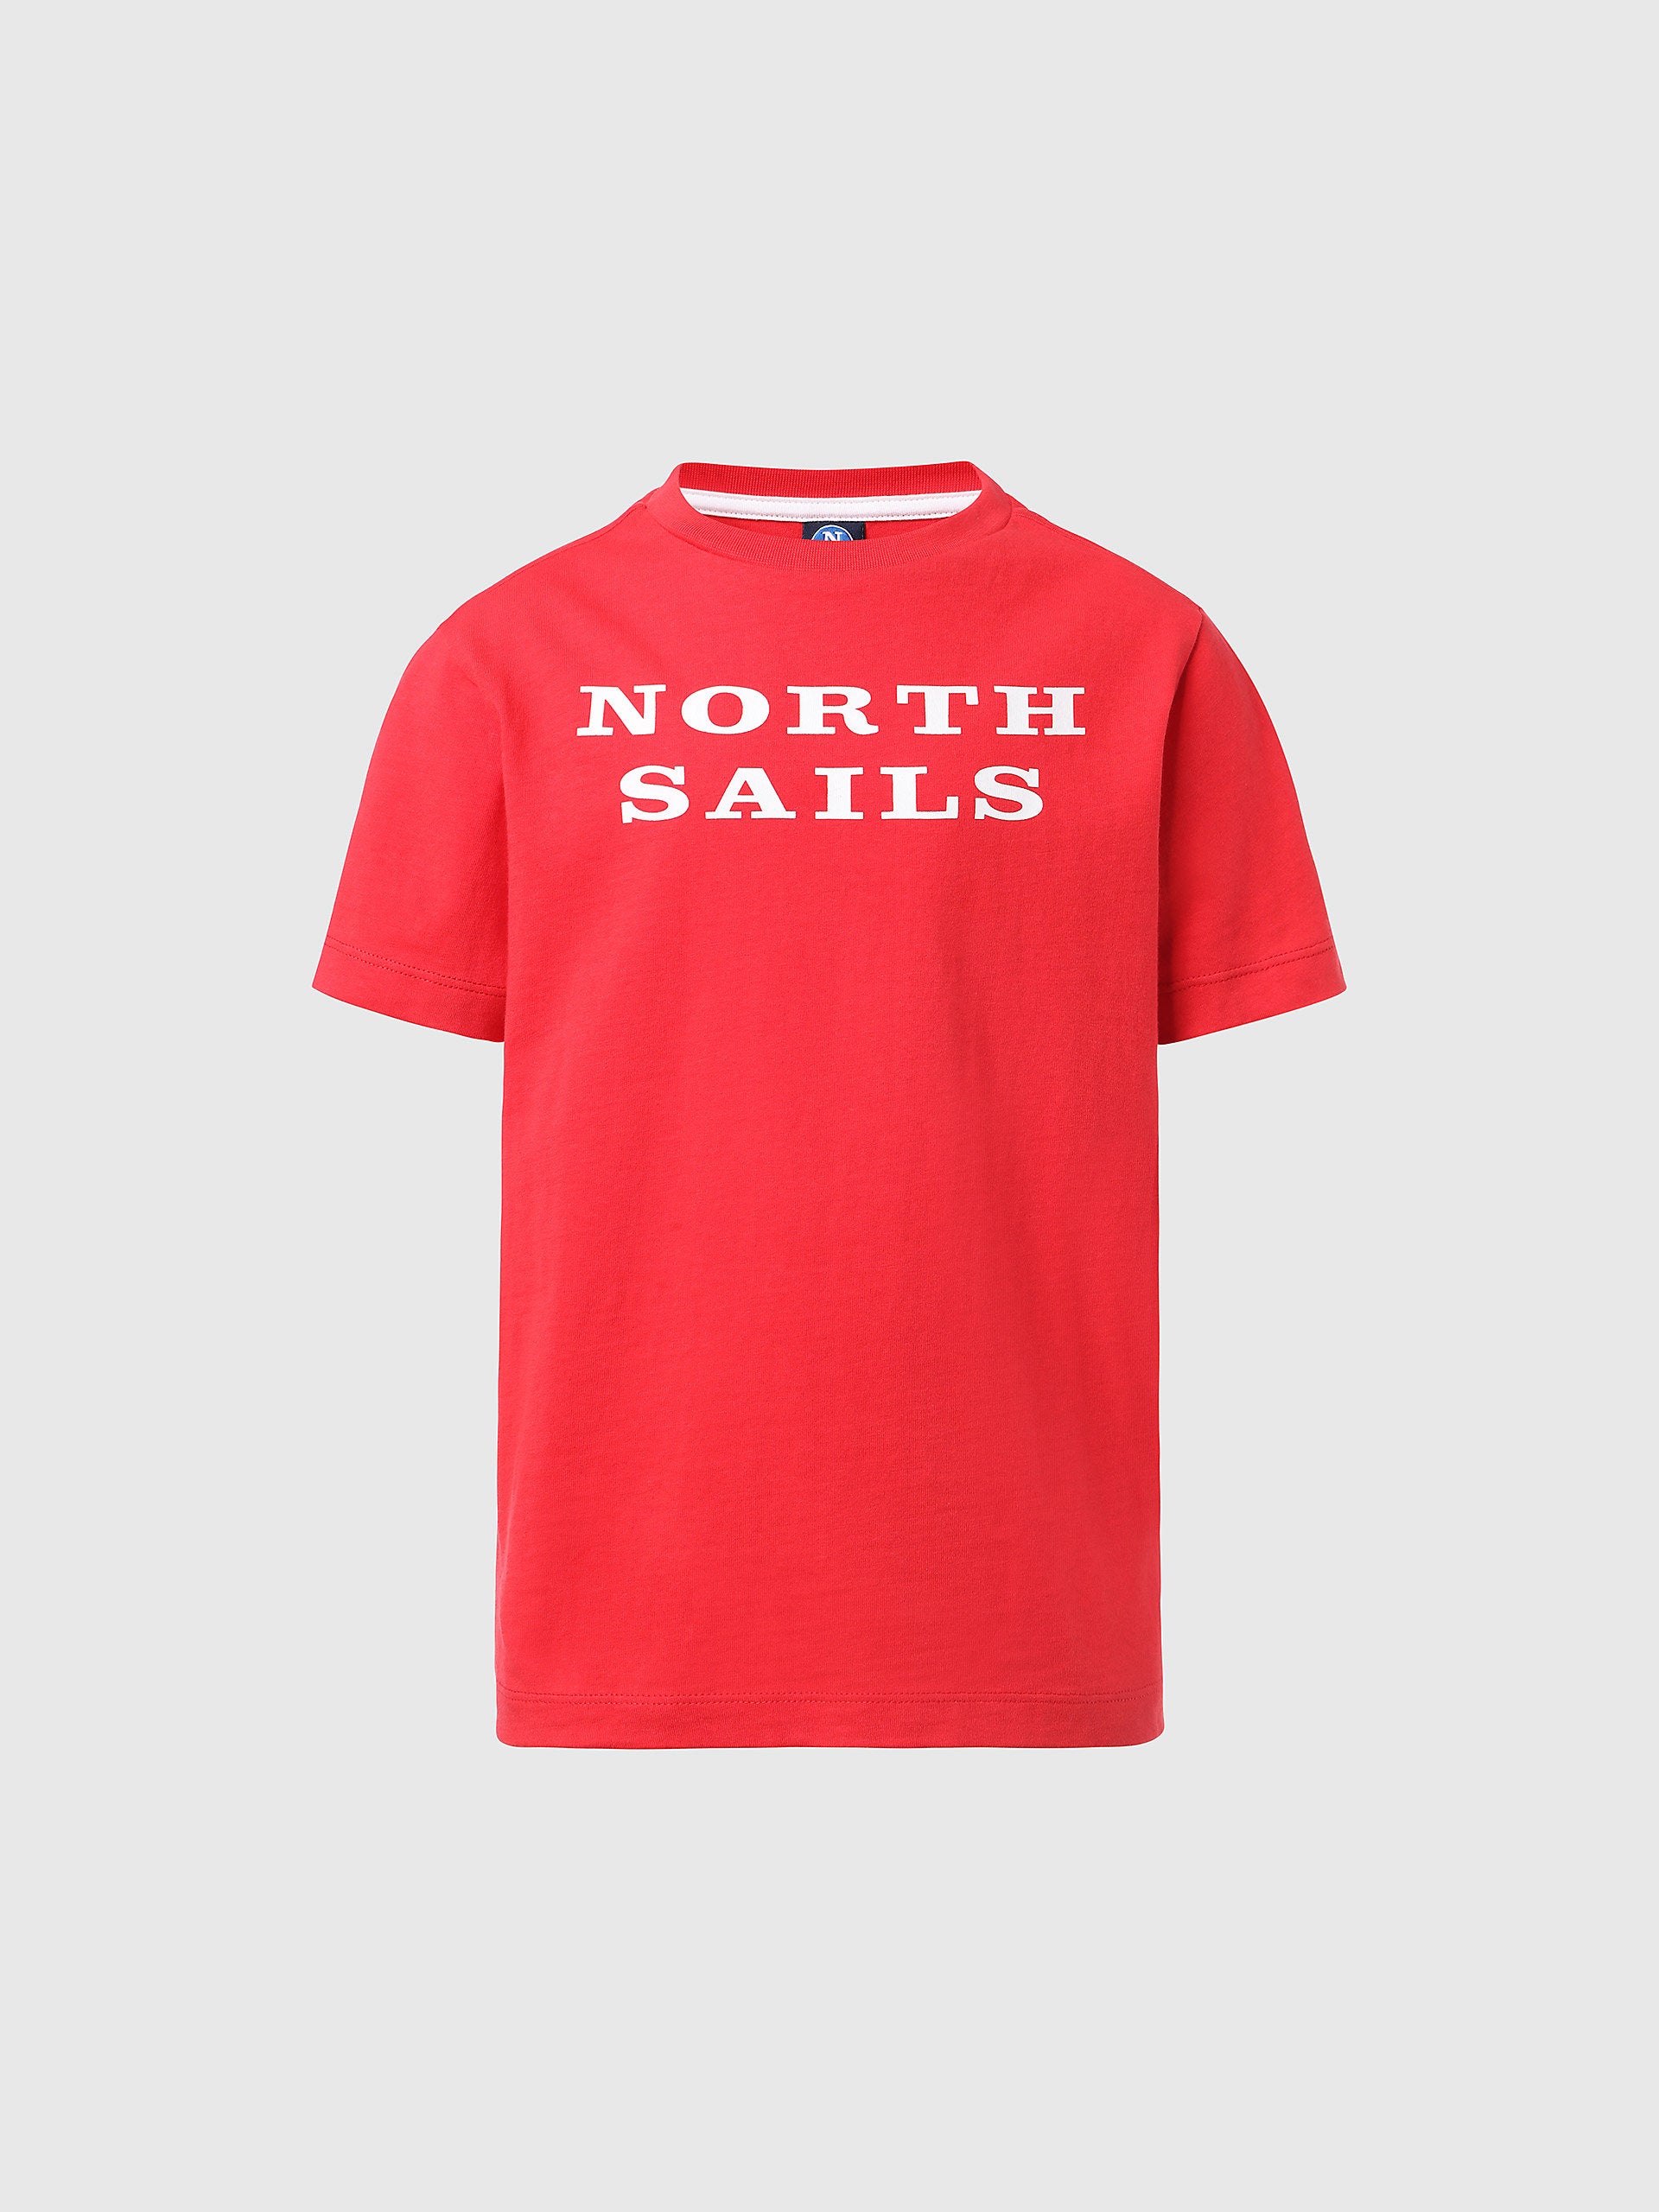 North Sails - T-shirt with chest printNorth SailsRed6